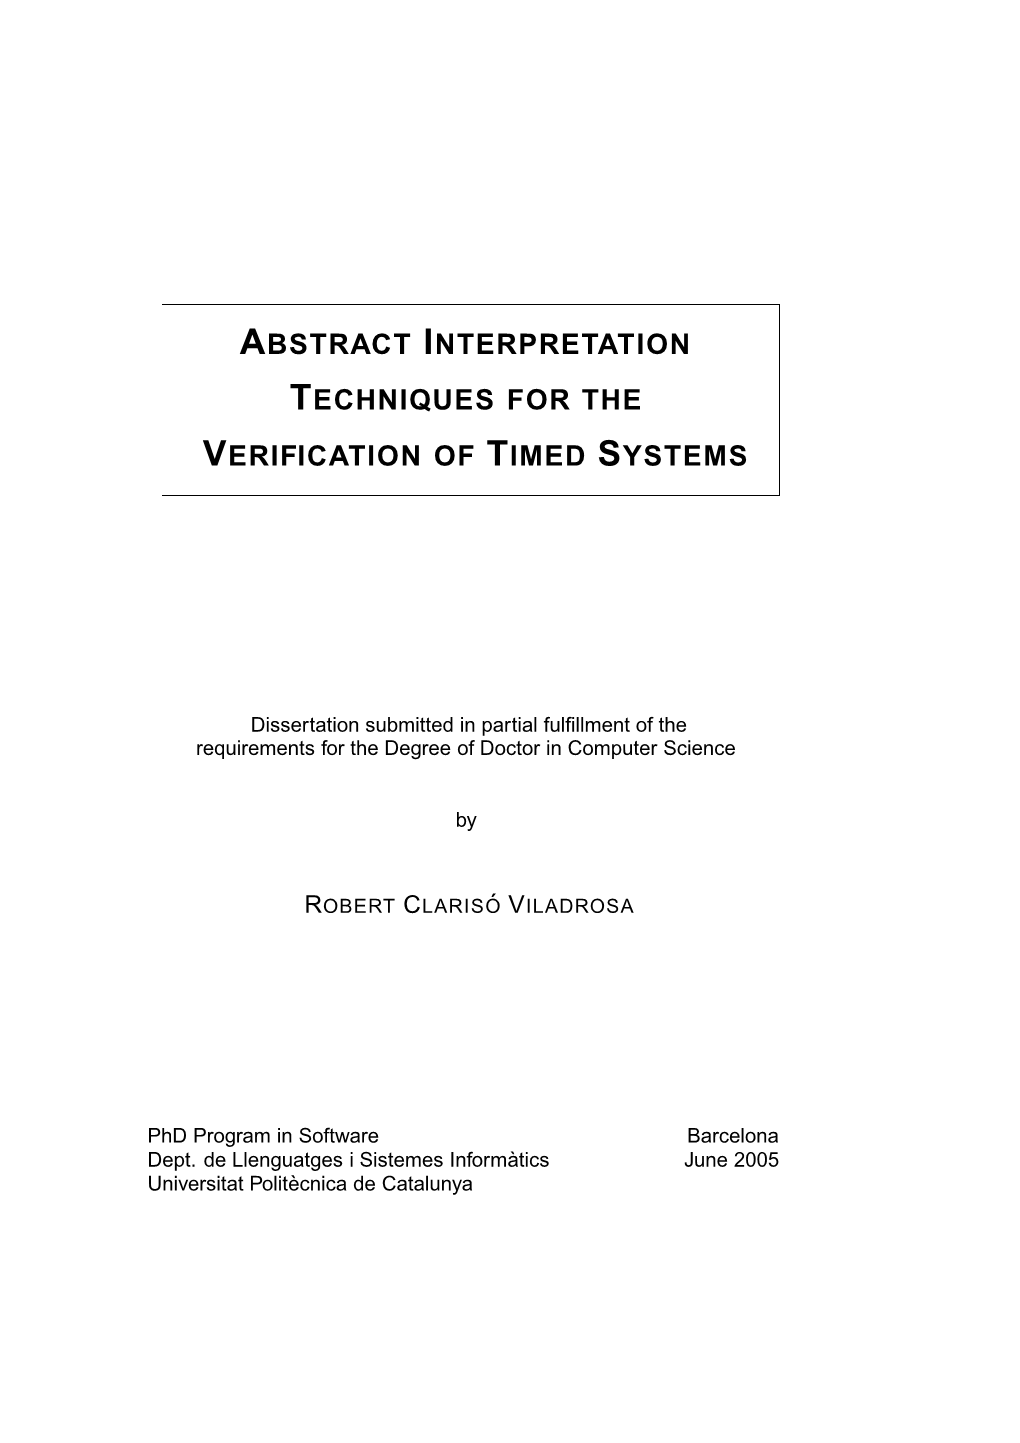 Abstract Interpretation Techniques for the Verification of Timed Systems